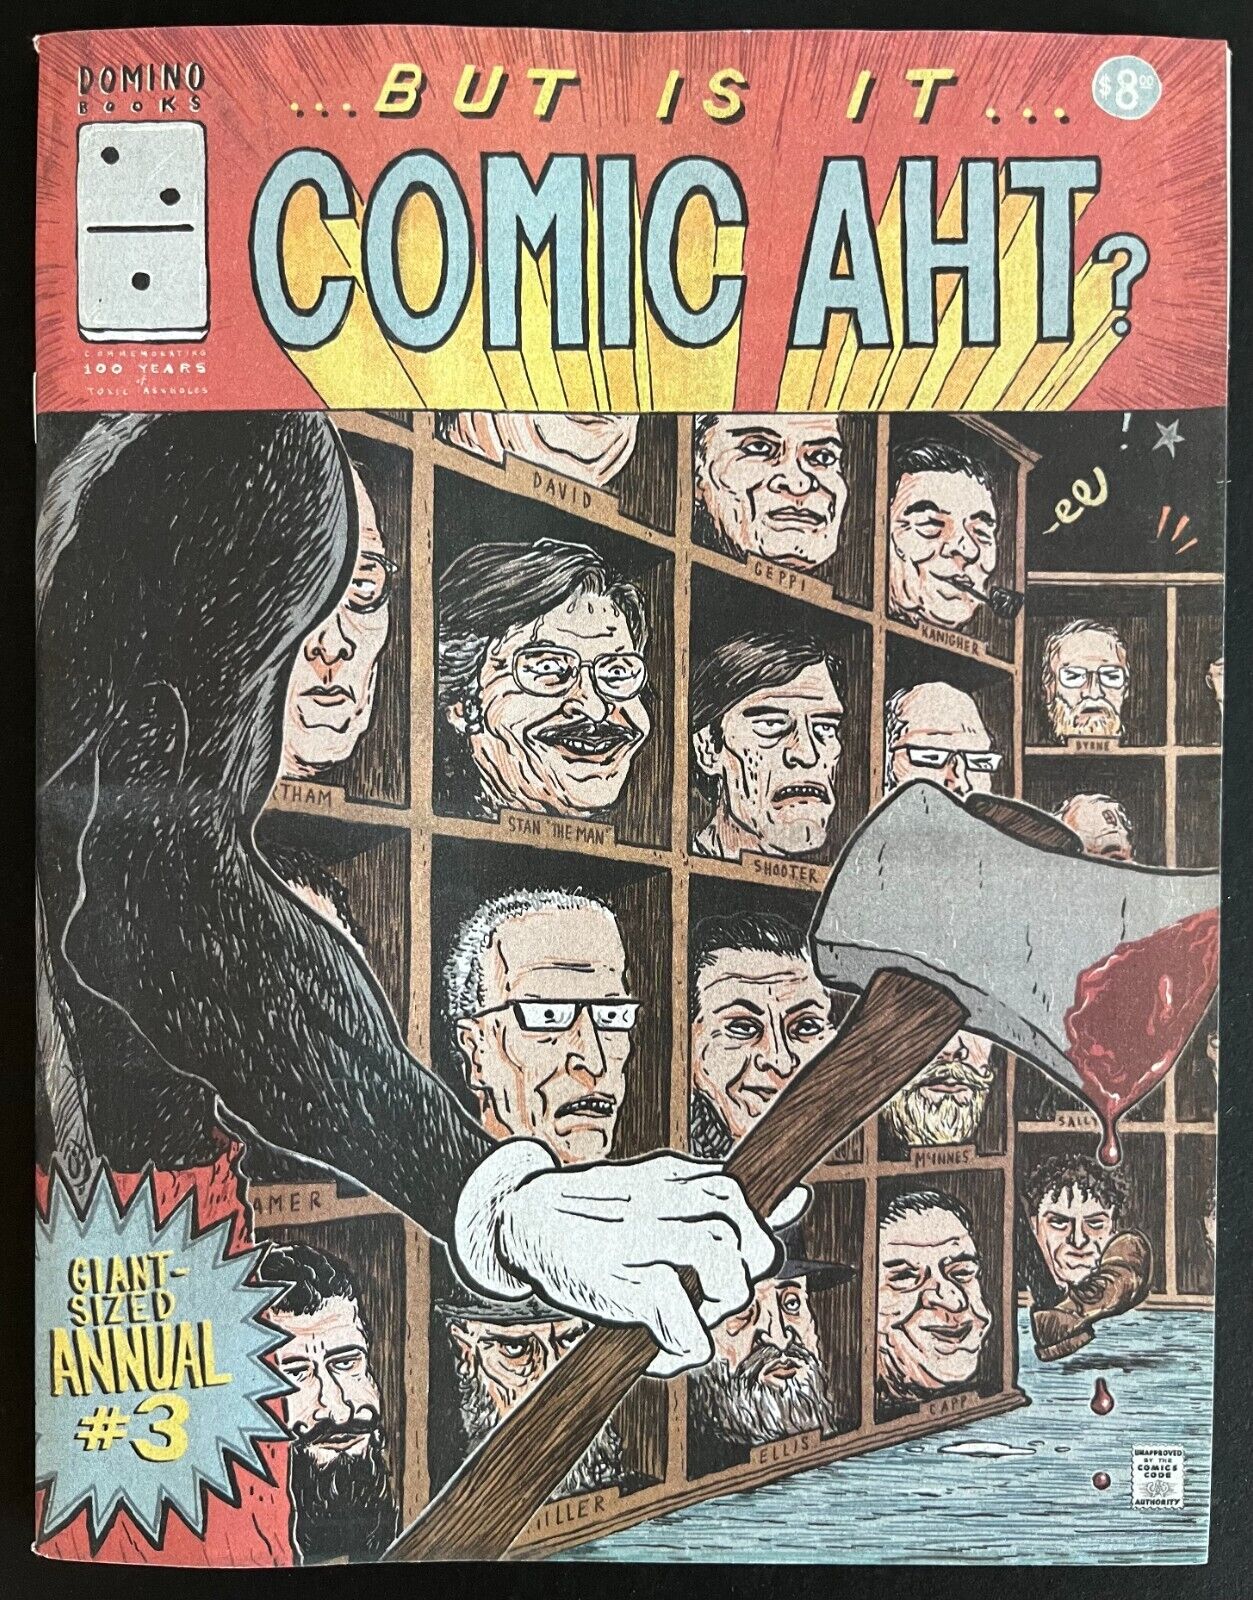 But Is It... Comic Aht? Giant-Sizd Annual #3 (March 2021, Domino Books, Zine)